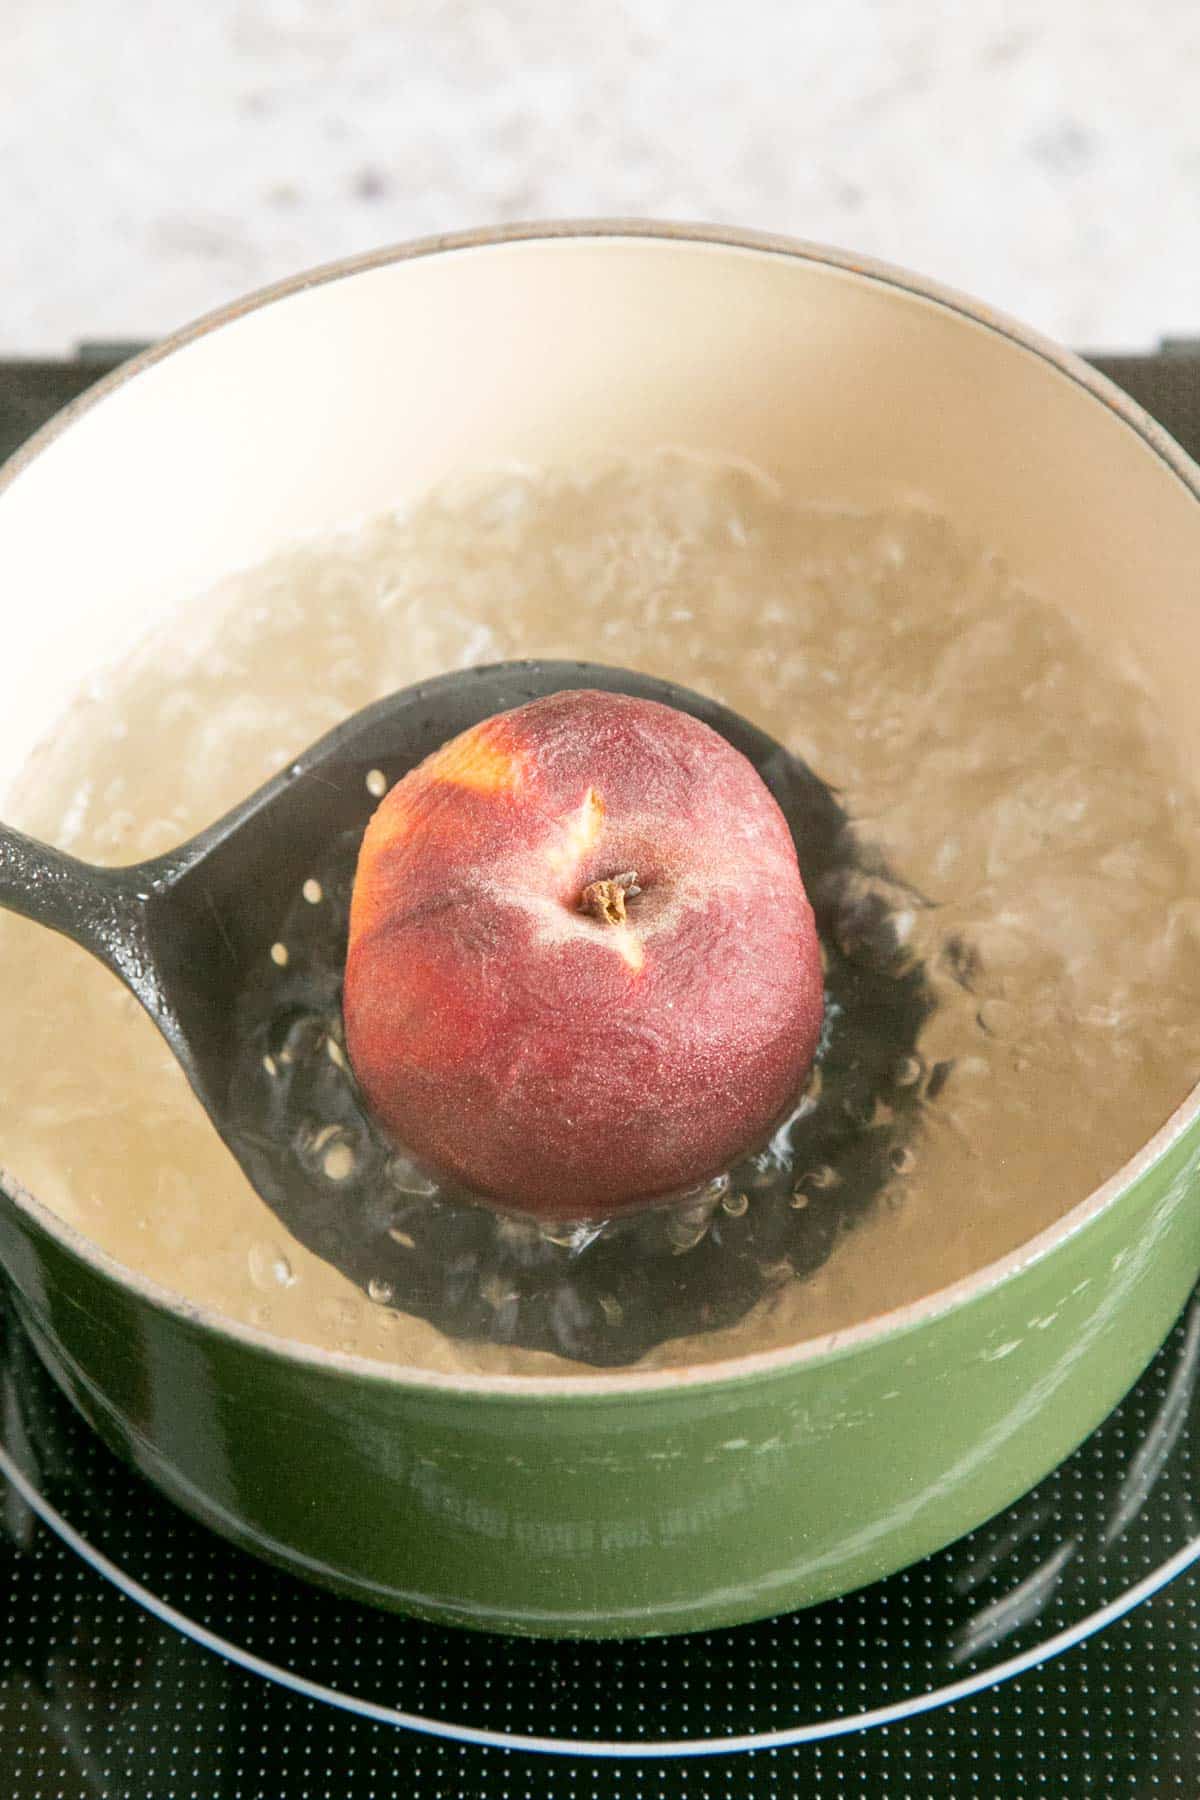 Lowering a peach into a saucepan of water.